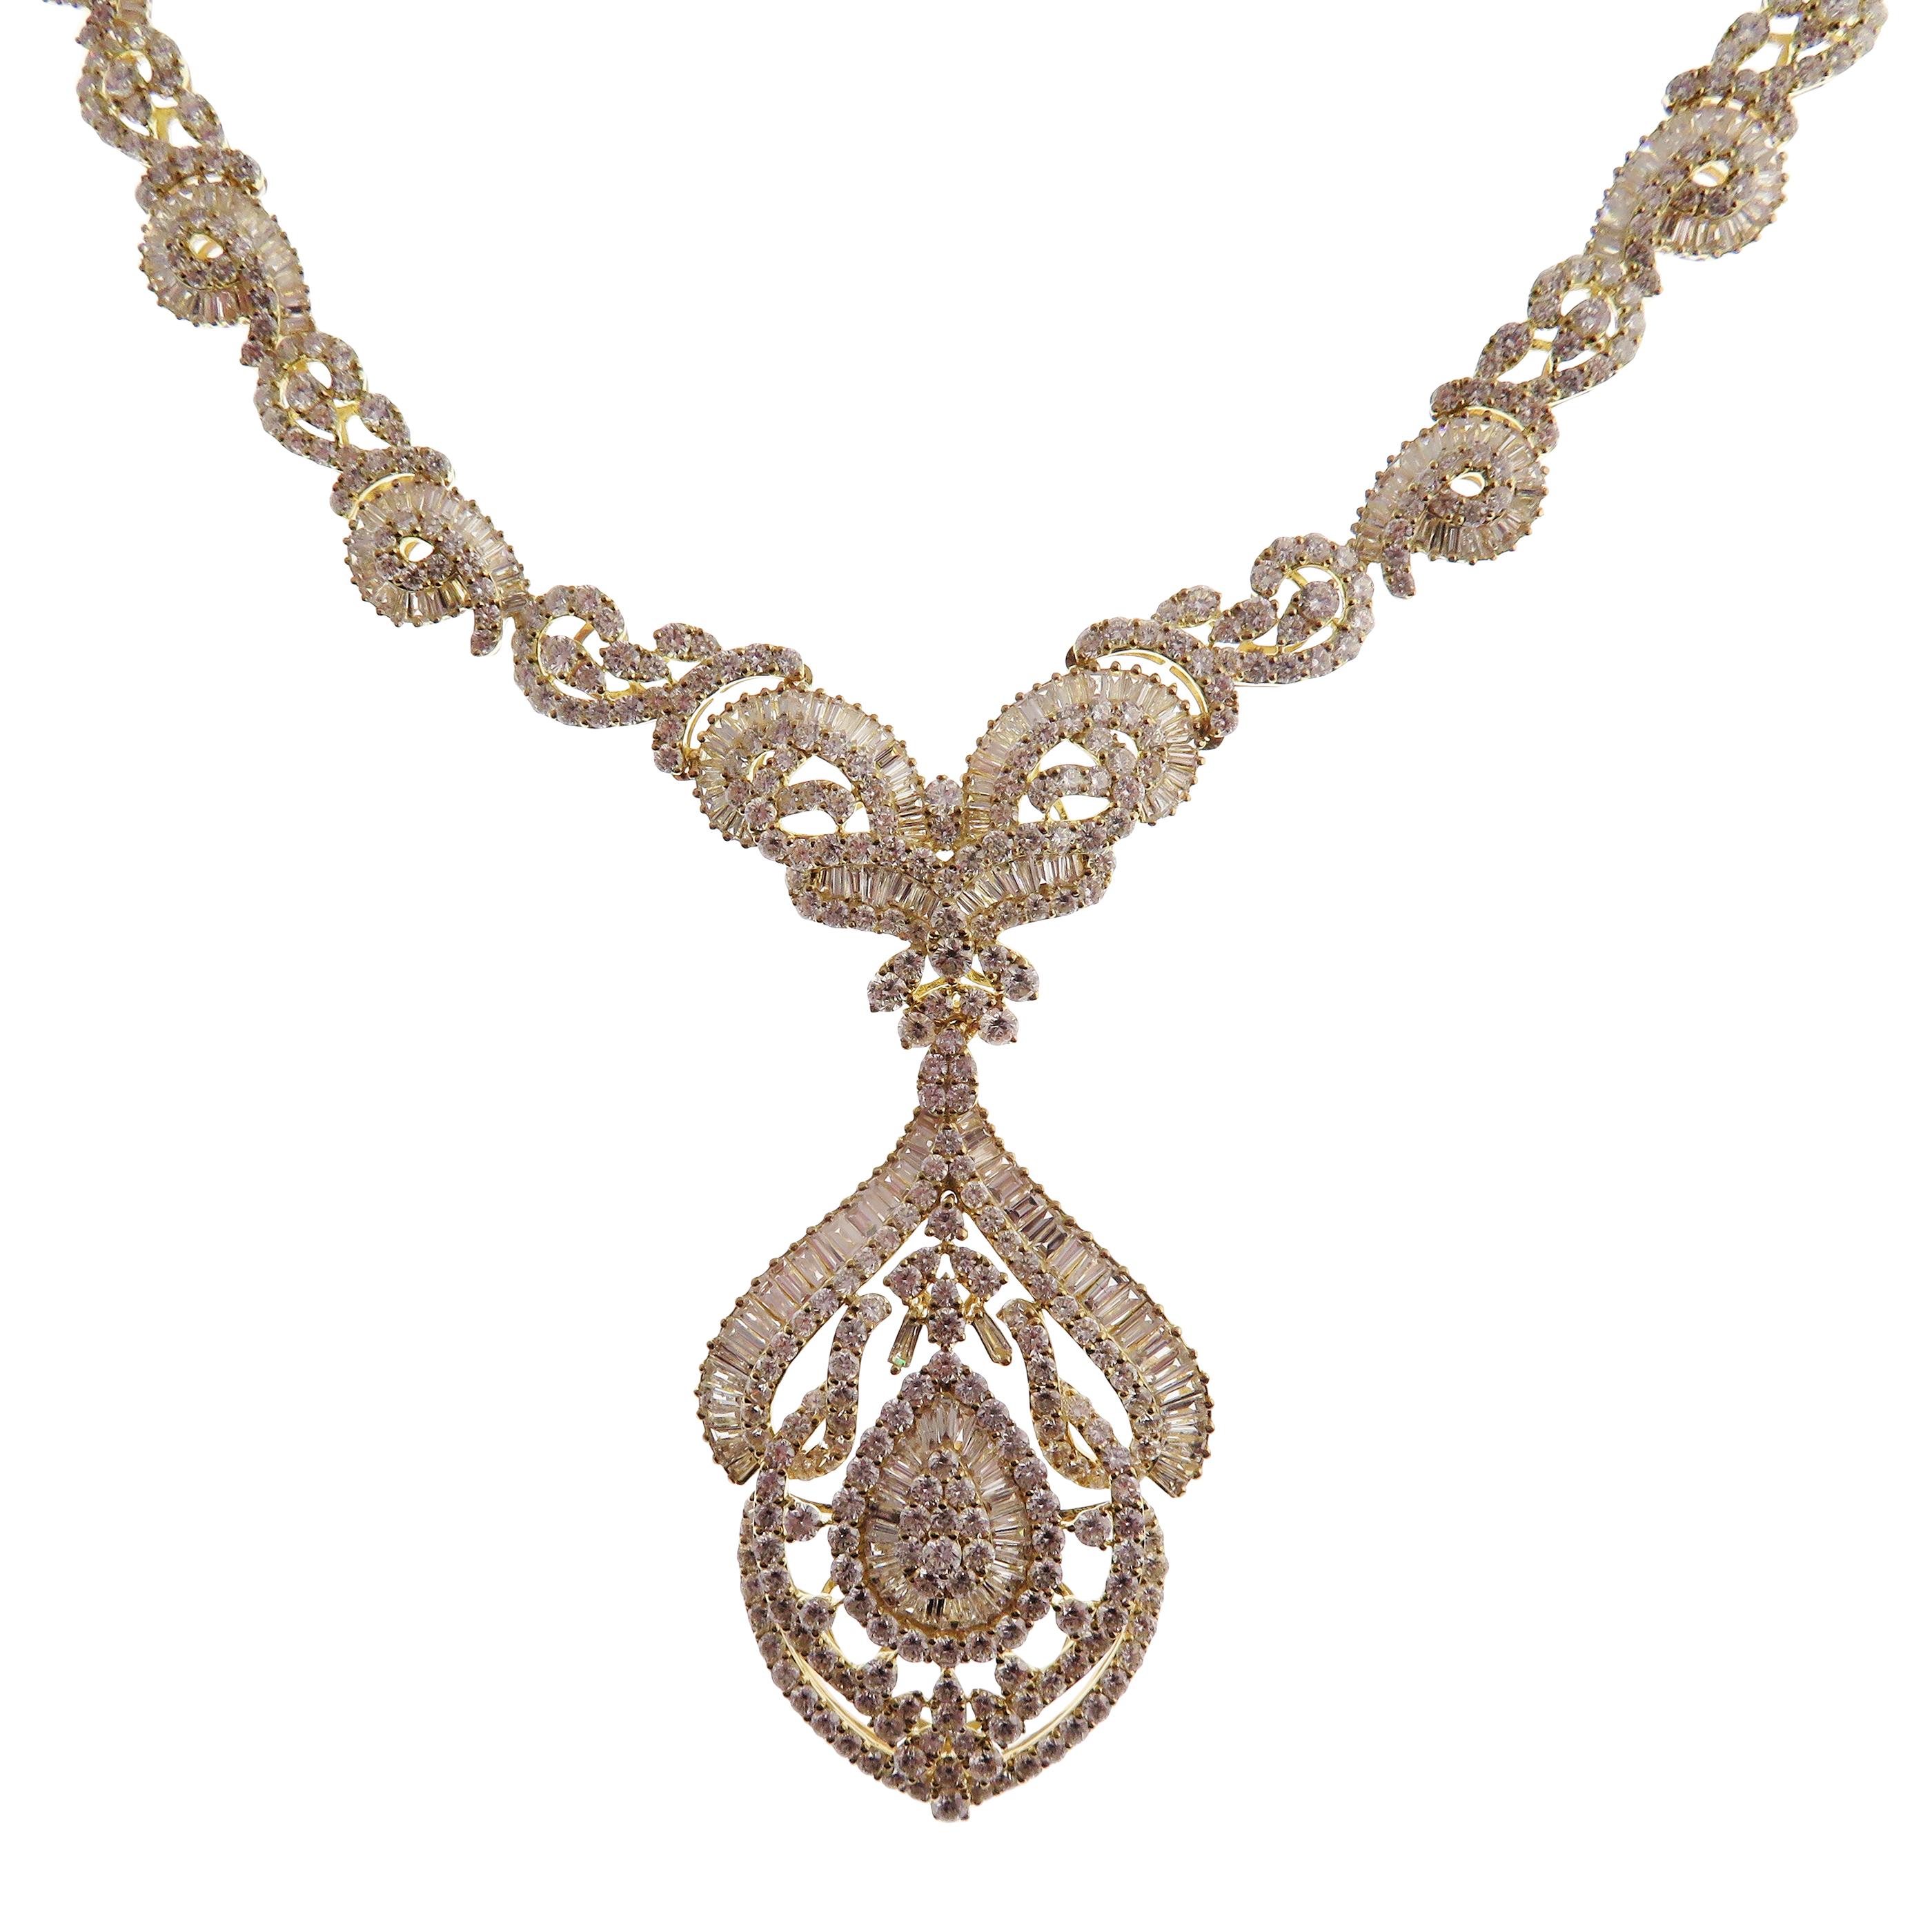 This chandelier baguette necklace is crafted in 18-karat yellow gold, weighing approximately 18.12 total carats of V Quality white diamond. These are very comfortable, flexible, and lay flat. We have these in matching earrings as well. 

Necklace is